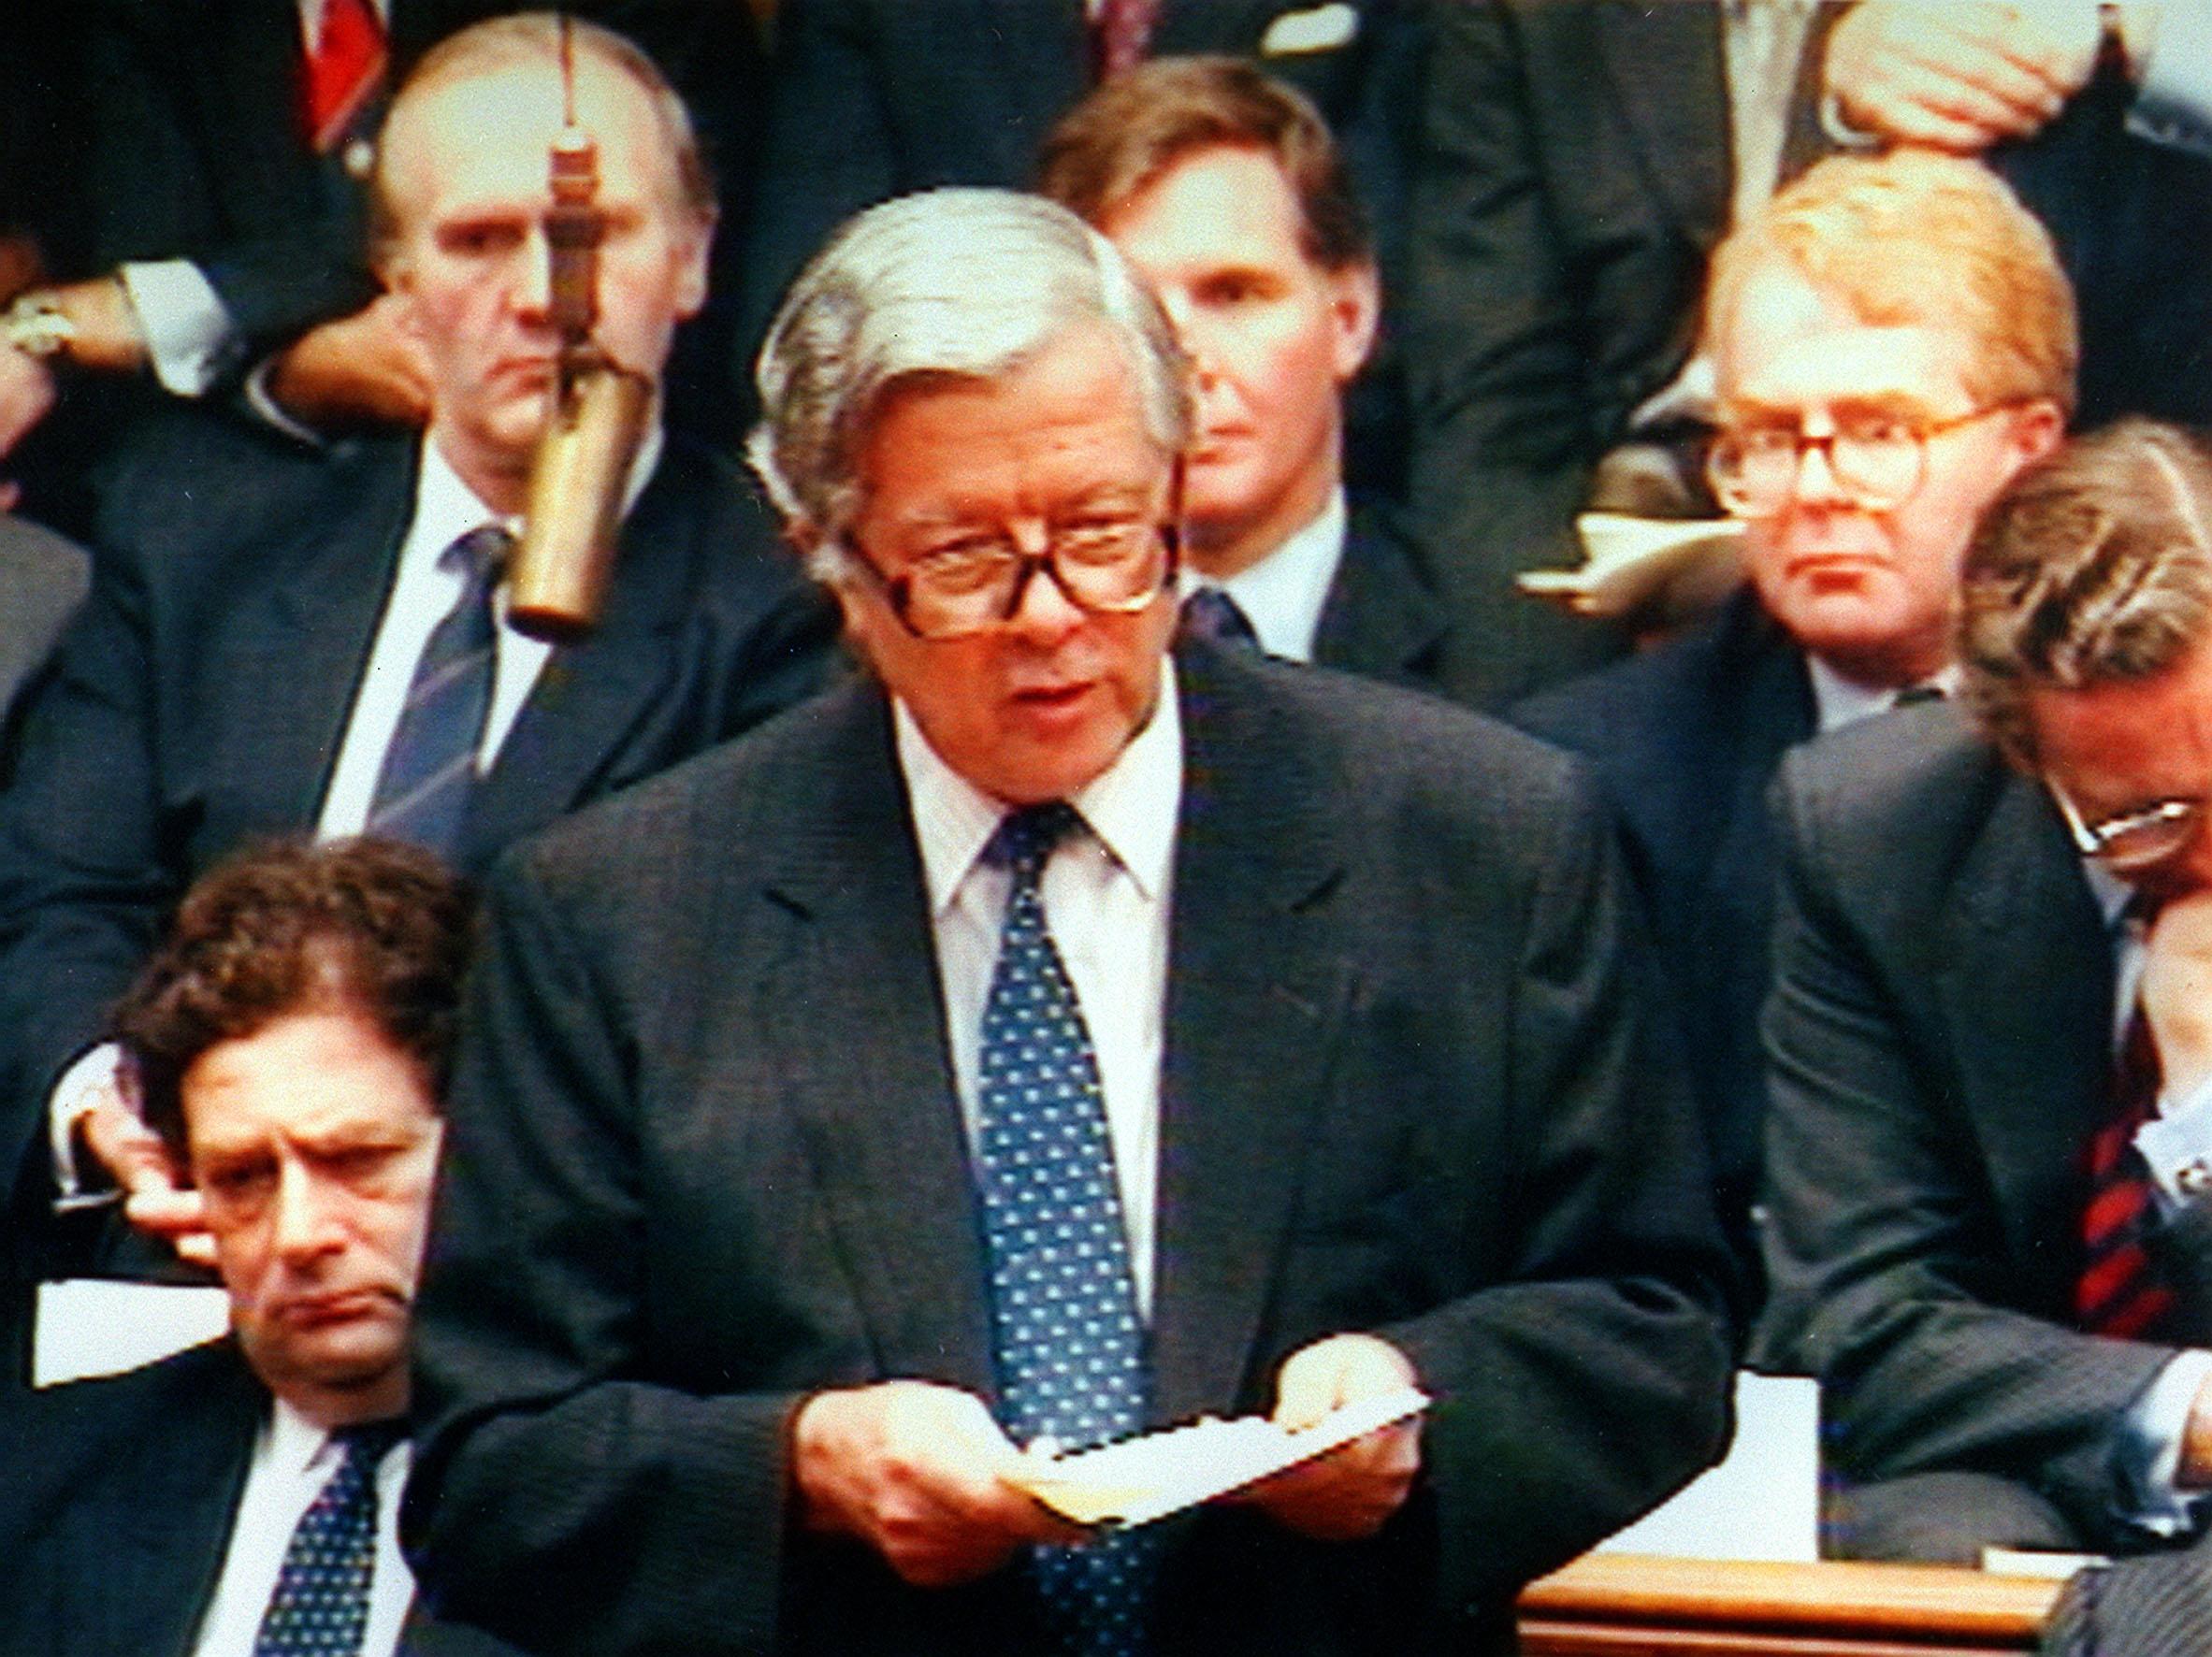 Sir Geoffrey Howe’s resignation speech to the House of Commons in November, 1990